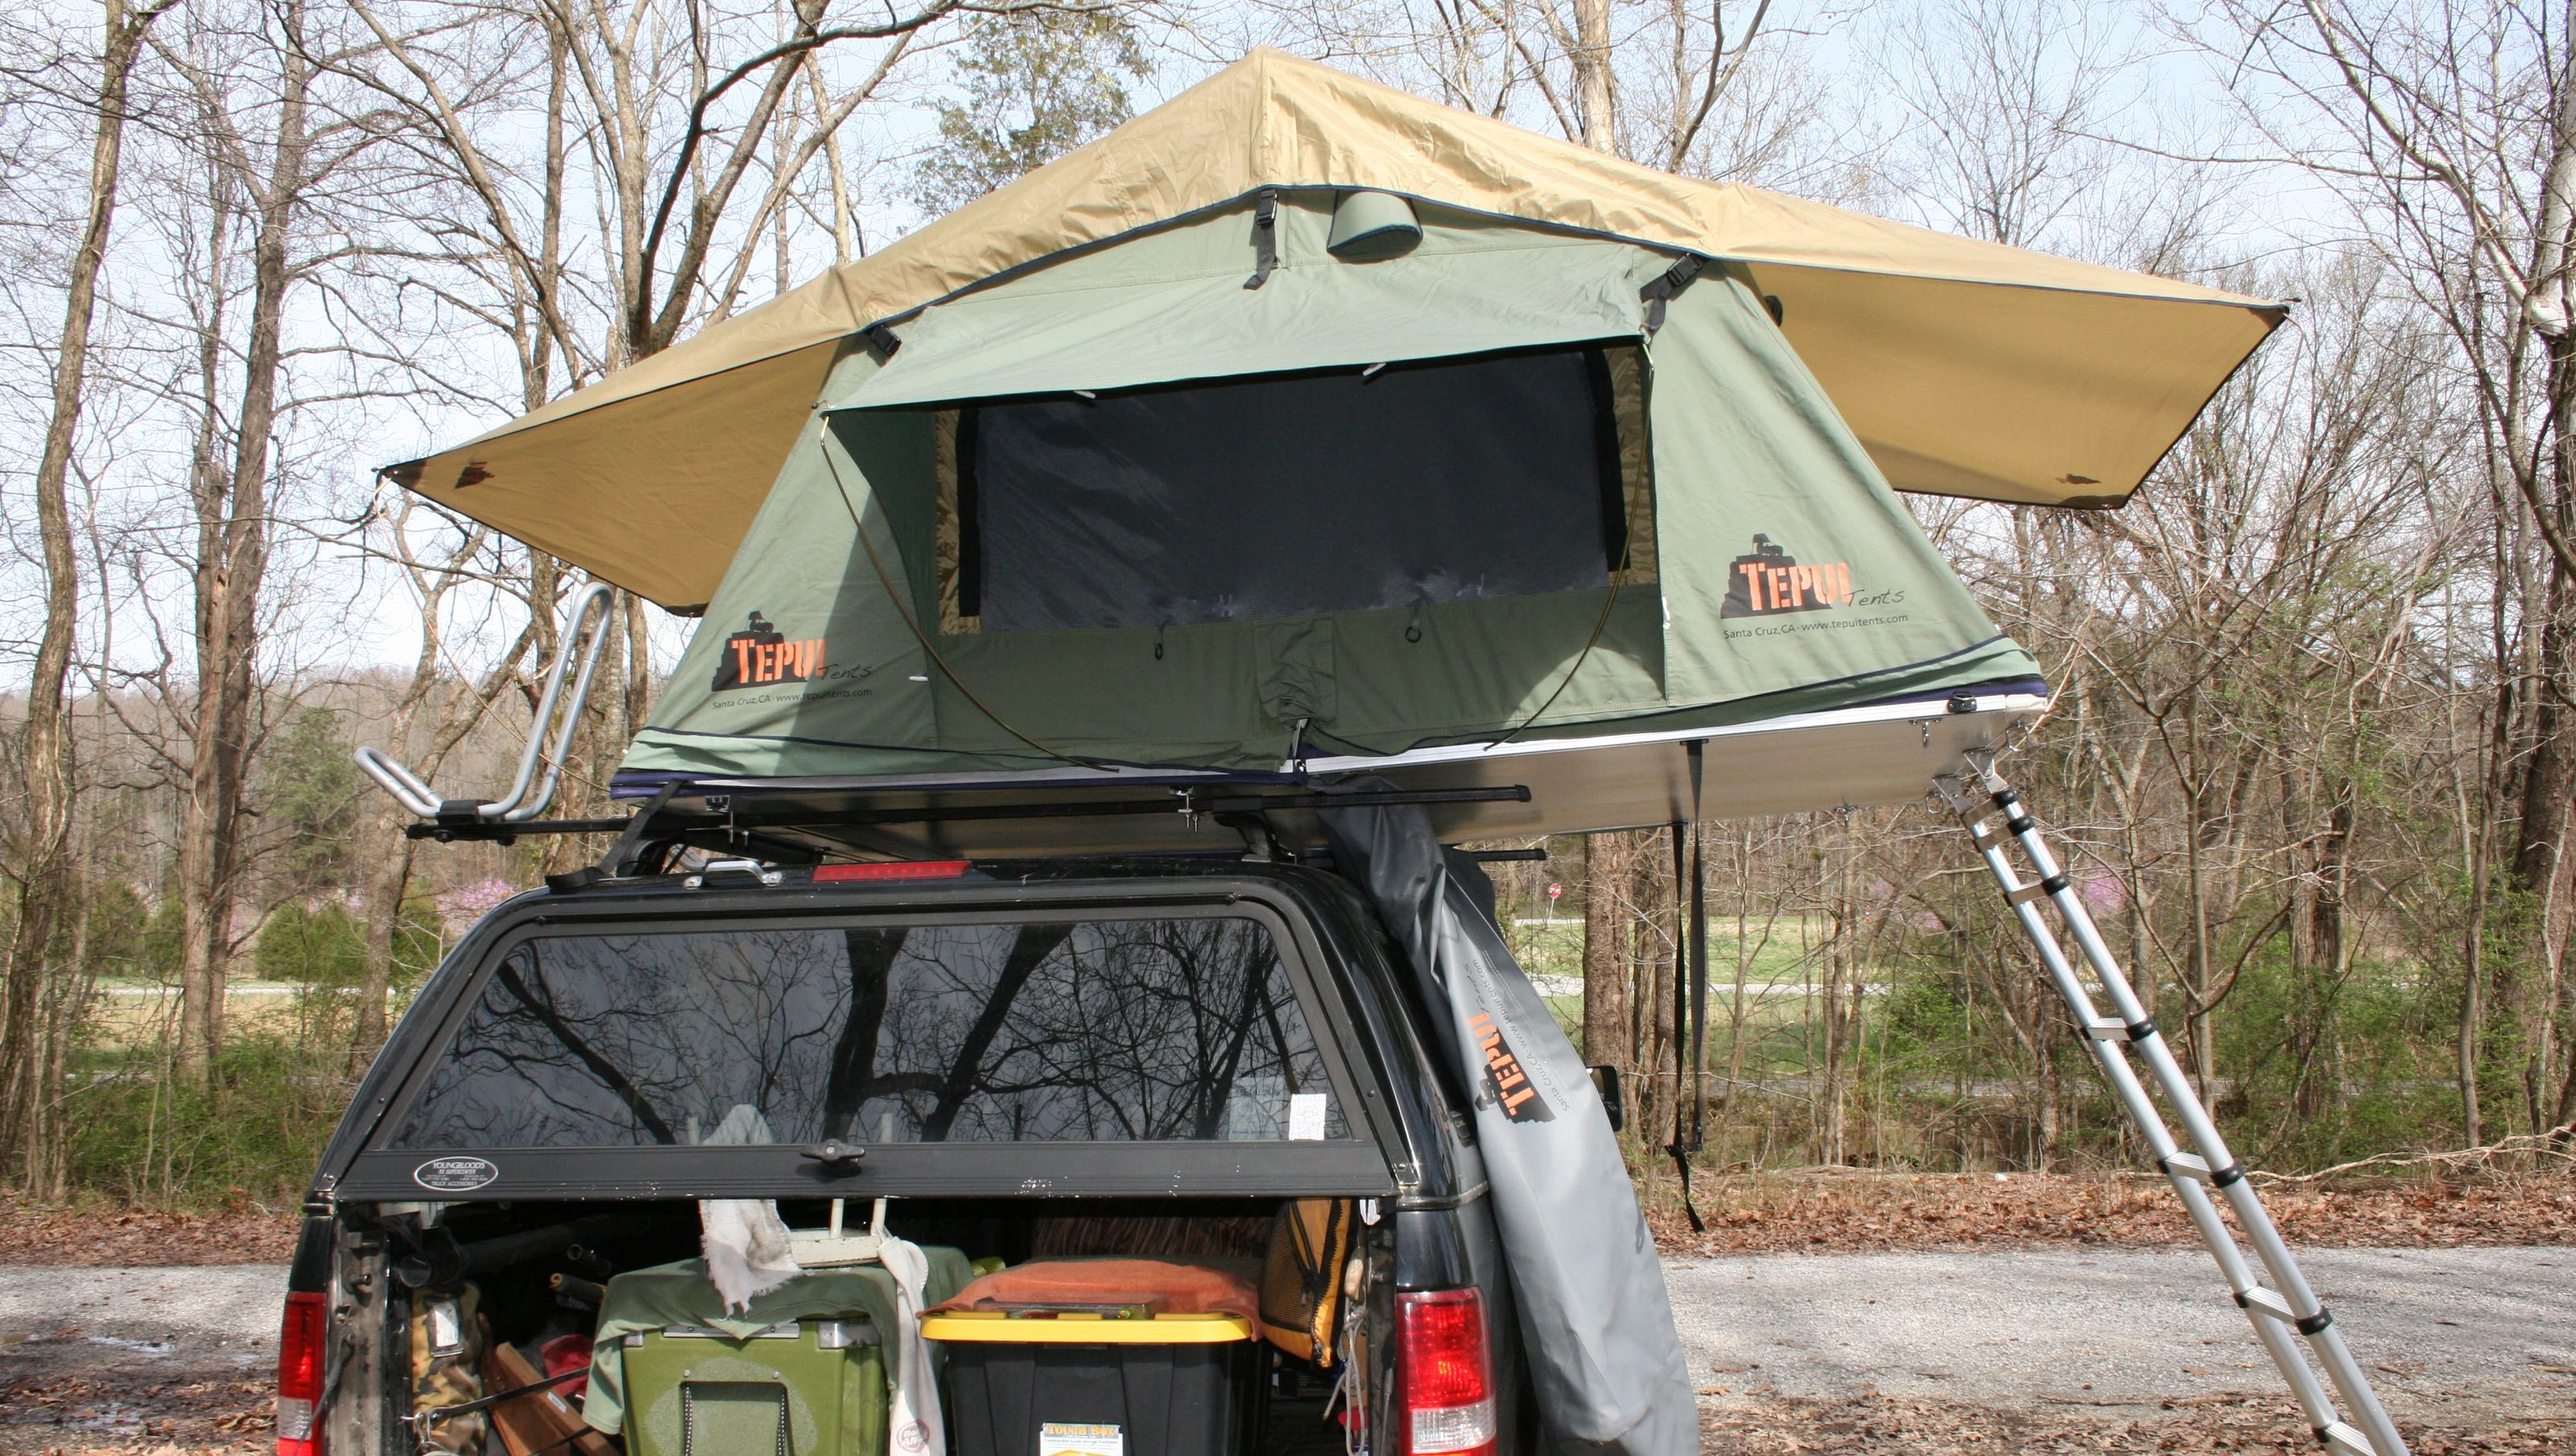 Sleutel Winkelcentrum louter Review: A tent that mounts on top of your car